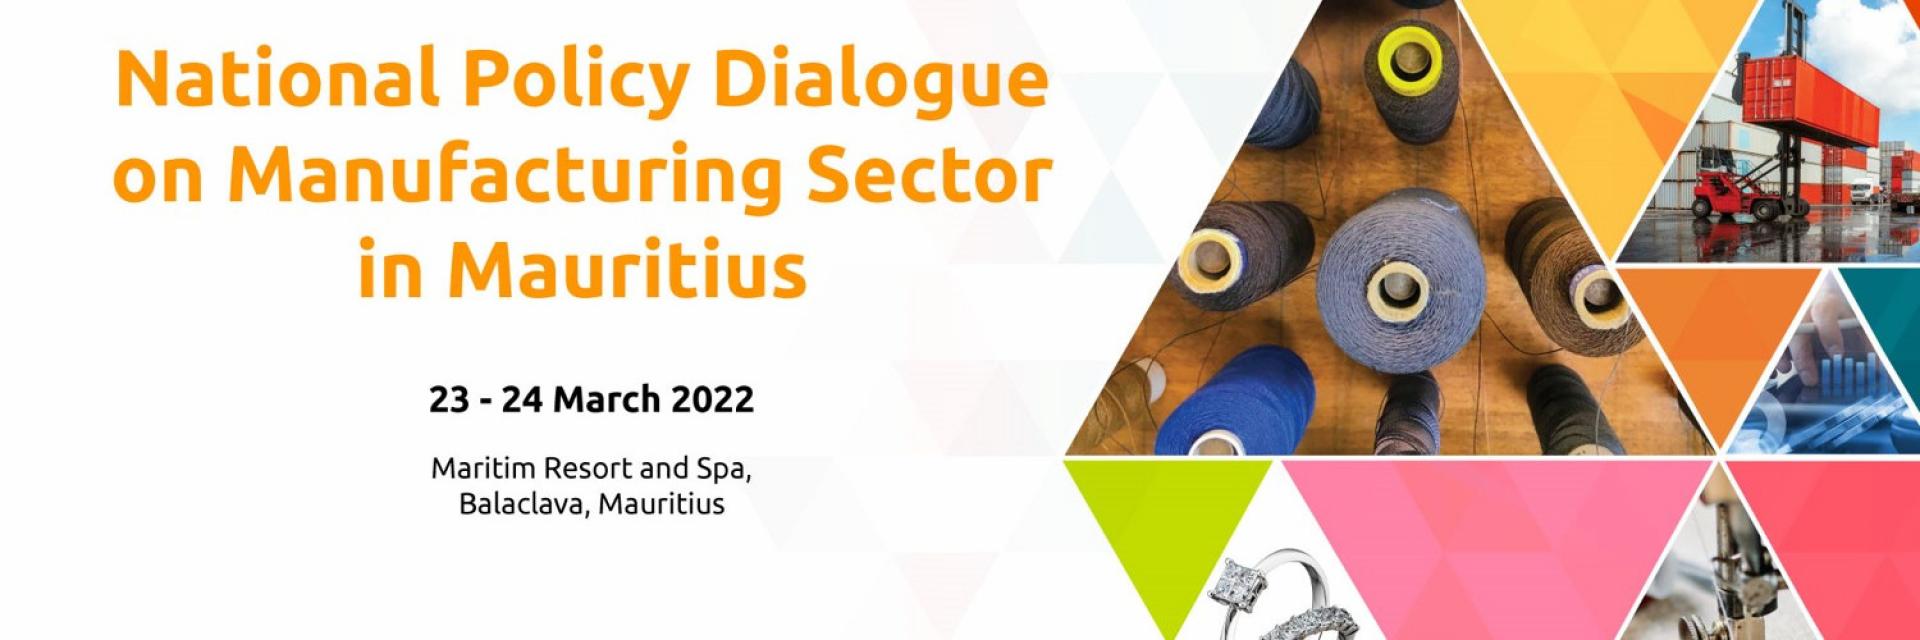 National Policy Dialogue on the Manufacturing Sector in Mauritius 